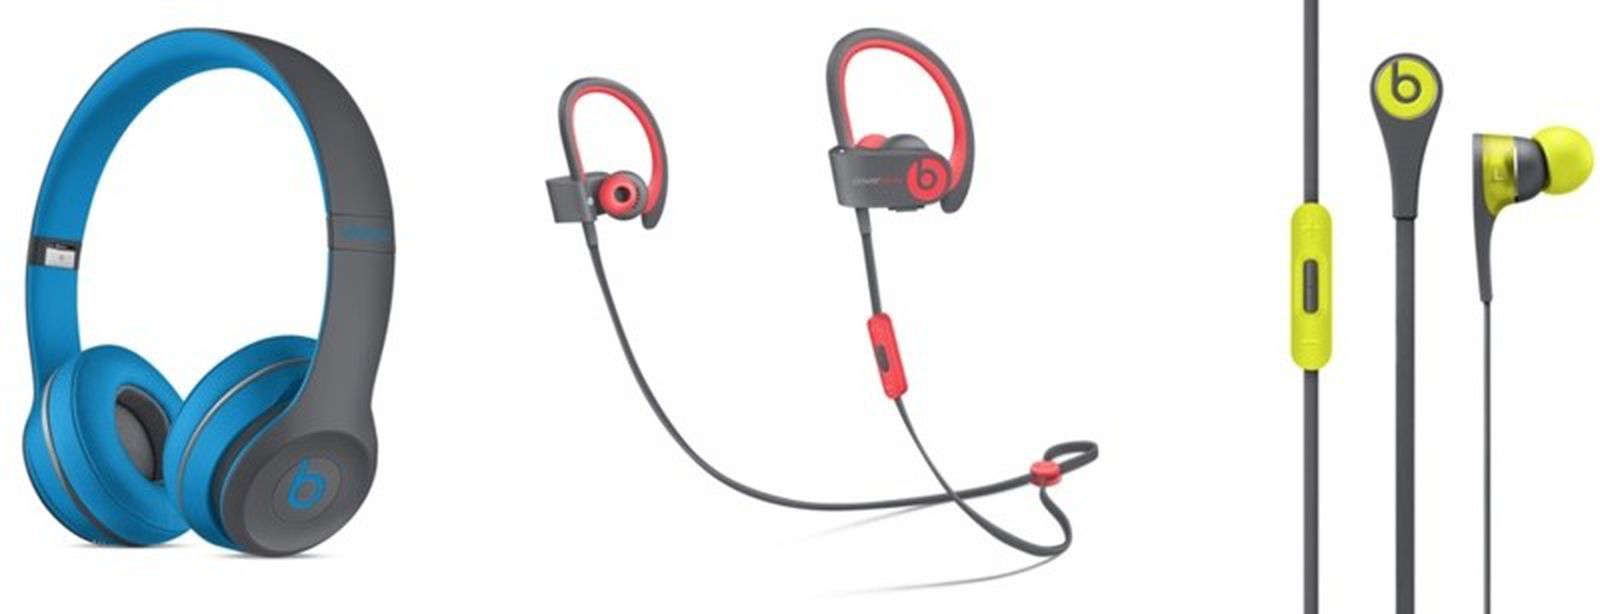 Apple Debuts Beats 'Active Collection' Headphones With New Colors 